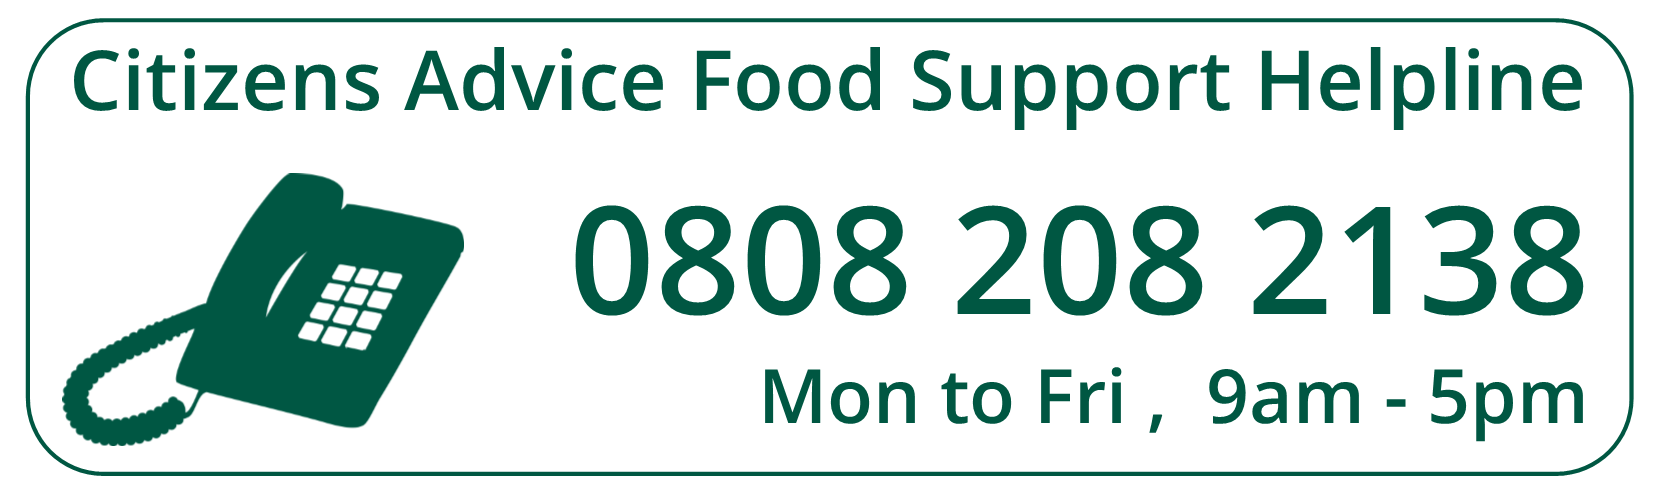 Citizens Advice Food Support Helpline 0808 208 2138 open Monday- Friday 9-5